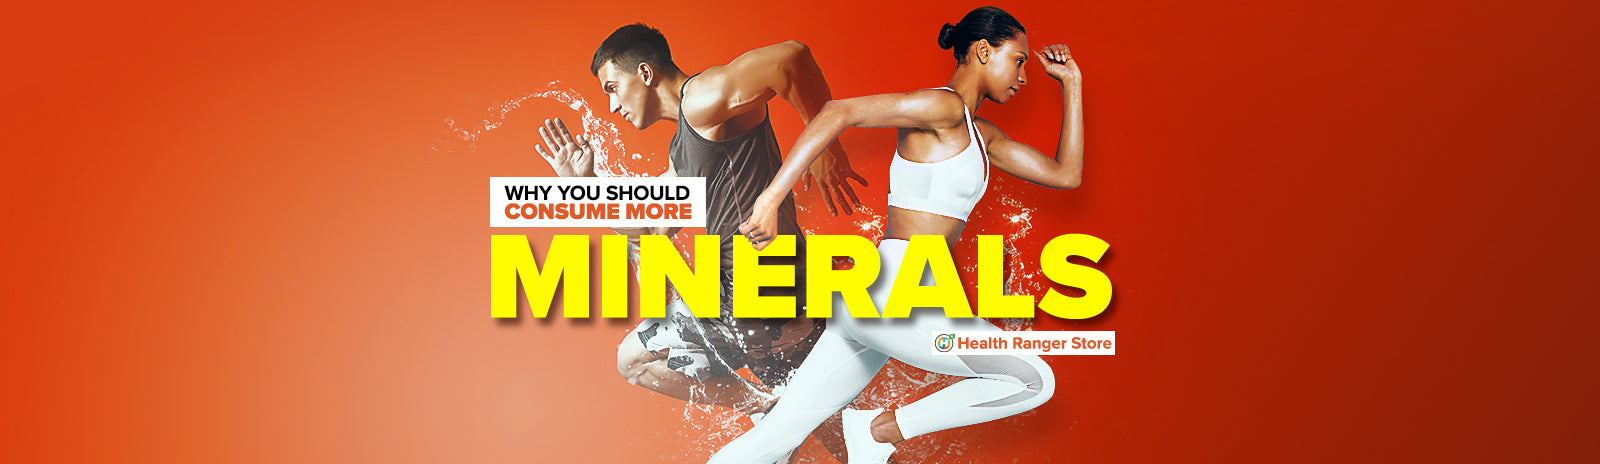 Why you should consume more minerals